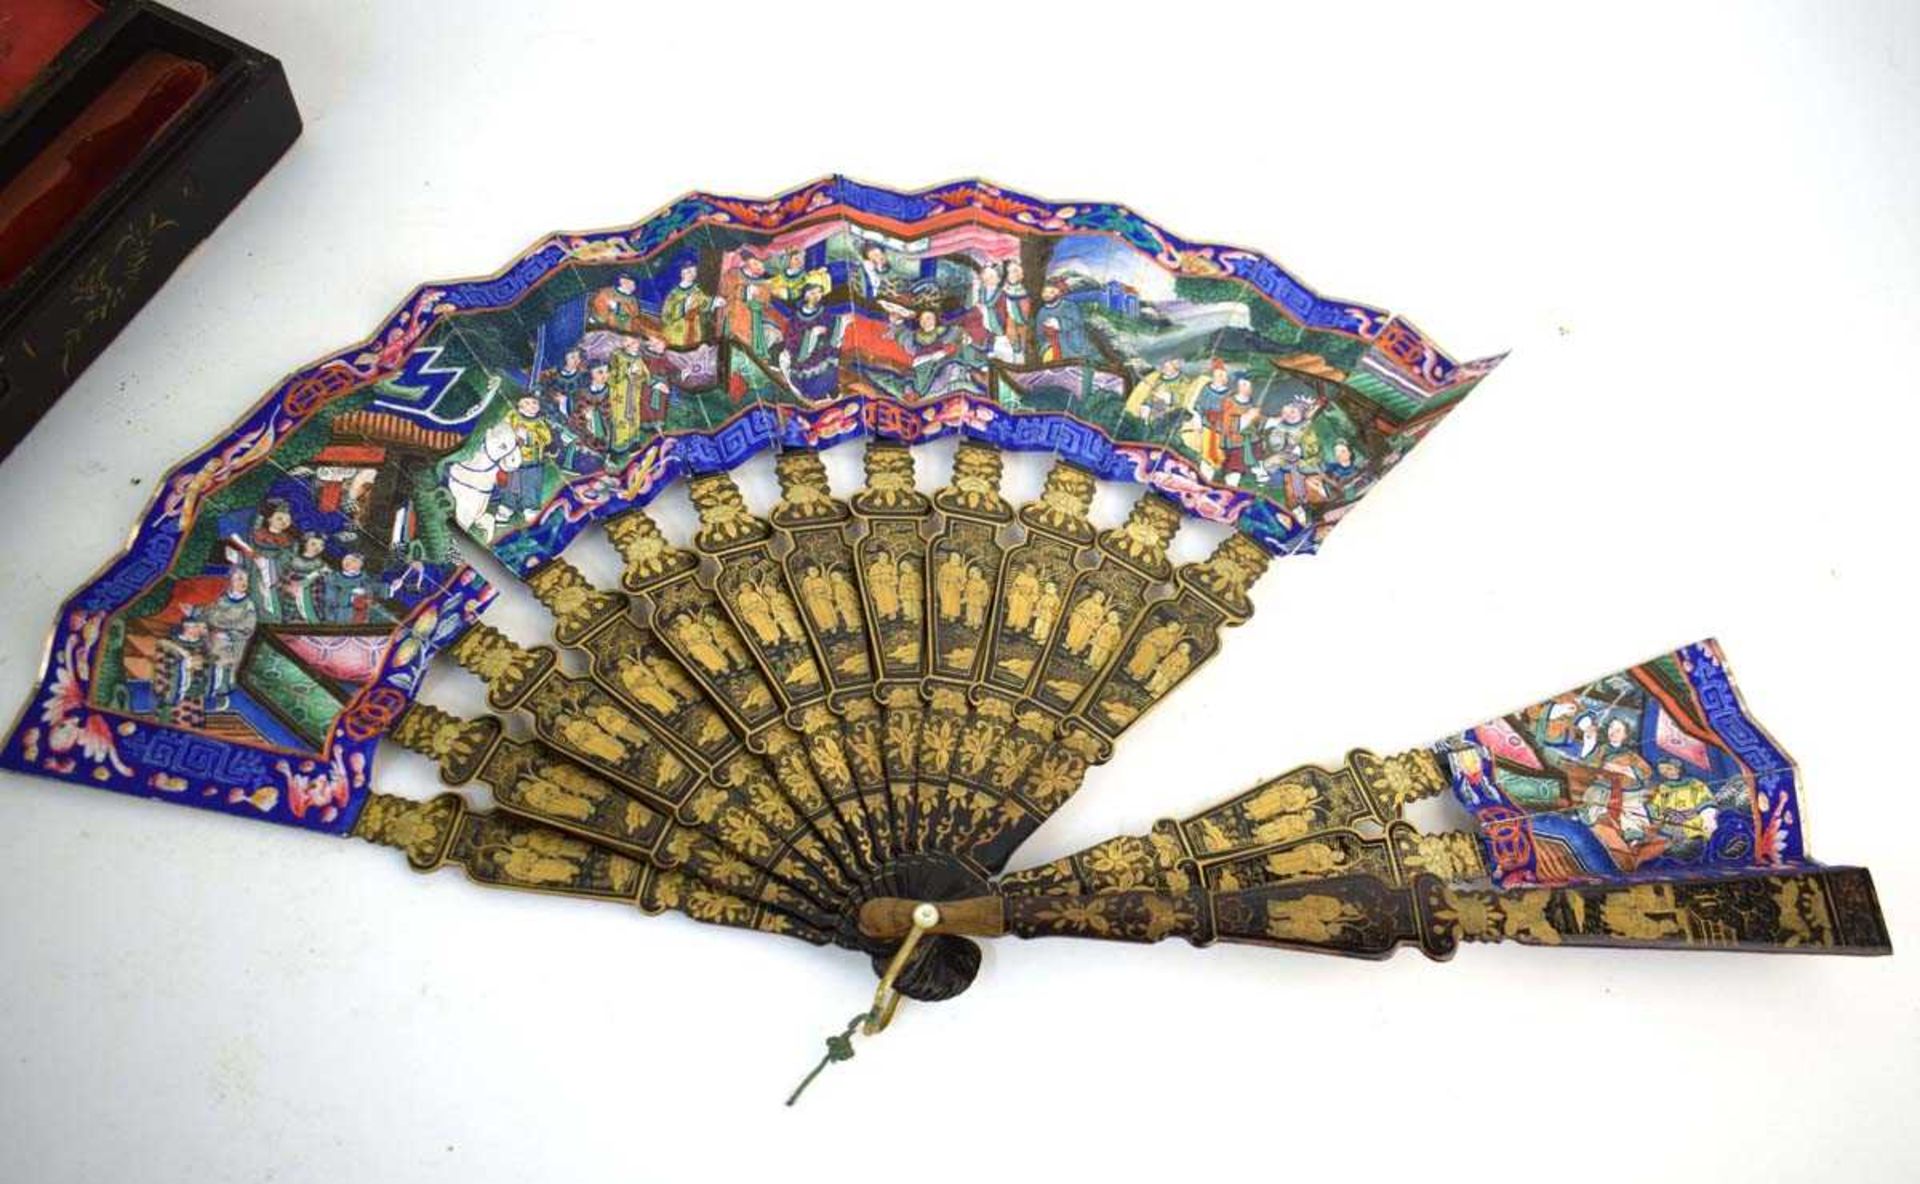 A Chinese lacquer work fan decorated with an extensive court scene, l, 28 cm when closed, w. 48.5 cm - Image 4 of 5